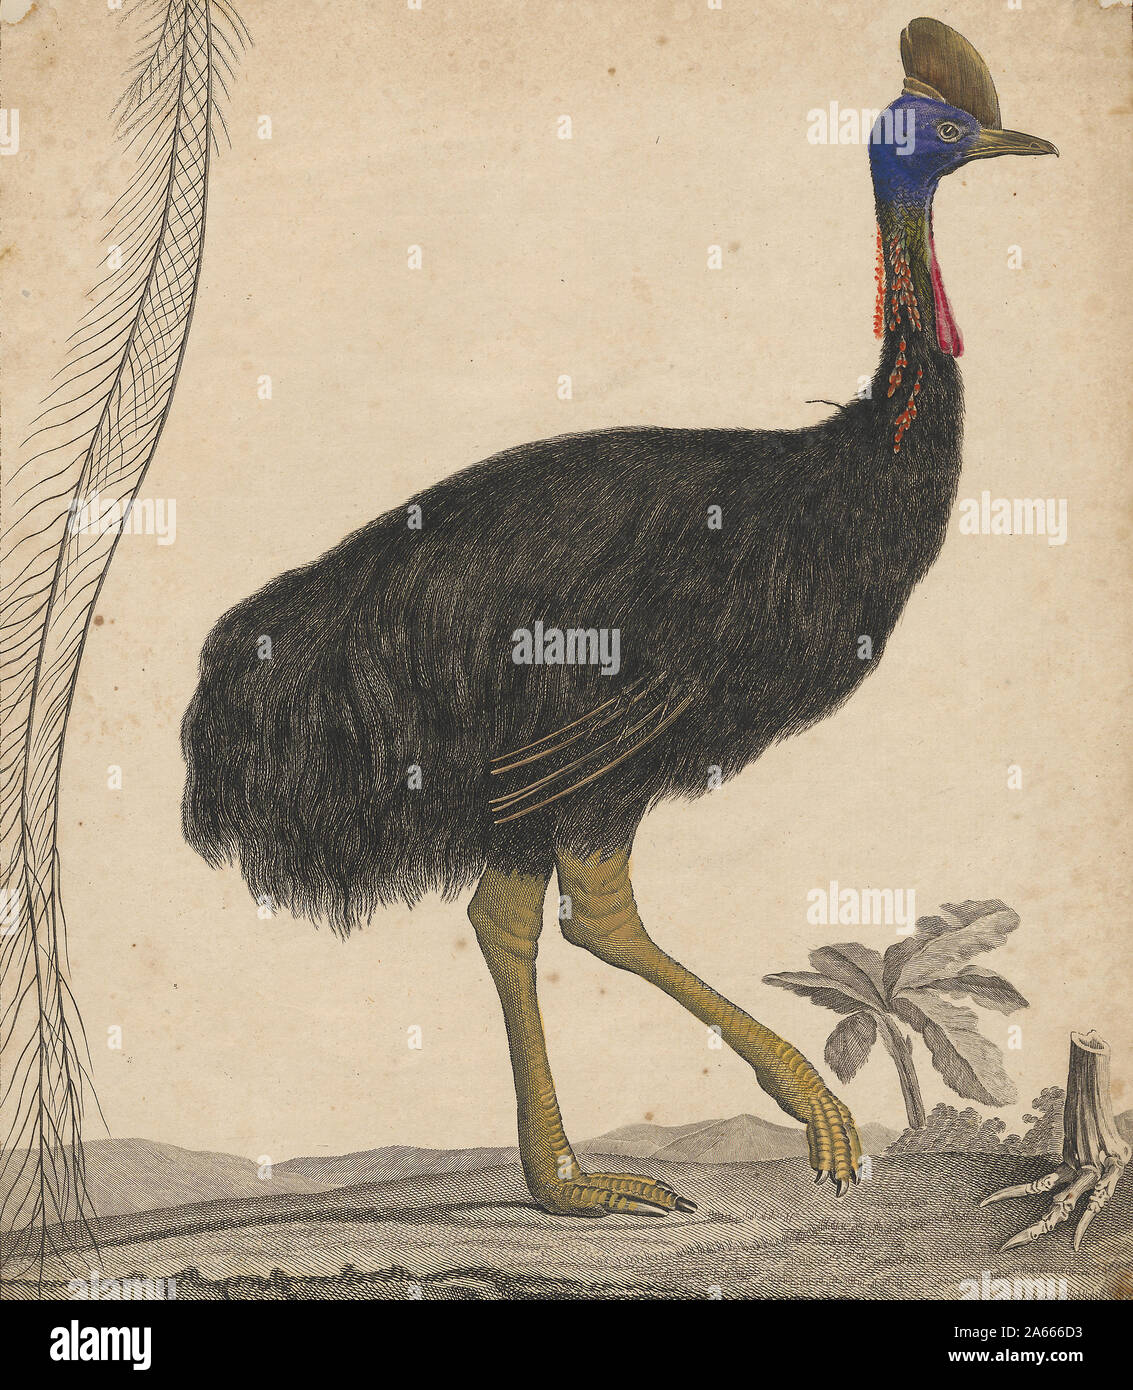 Casuarius emeu, Print, Cassowary, Cassowaries, genus Casuarius, are ratites (flightless birds without a keel on their sternum bone) that are native to the tropical forests of New Guinea (Papua New Guinea and Indonesia), East Nusa Tenggara, the Maluku Islands, and northeastern Australia., 1700-1880 Stock Photo